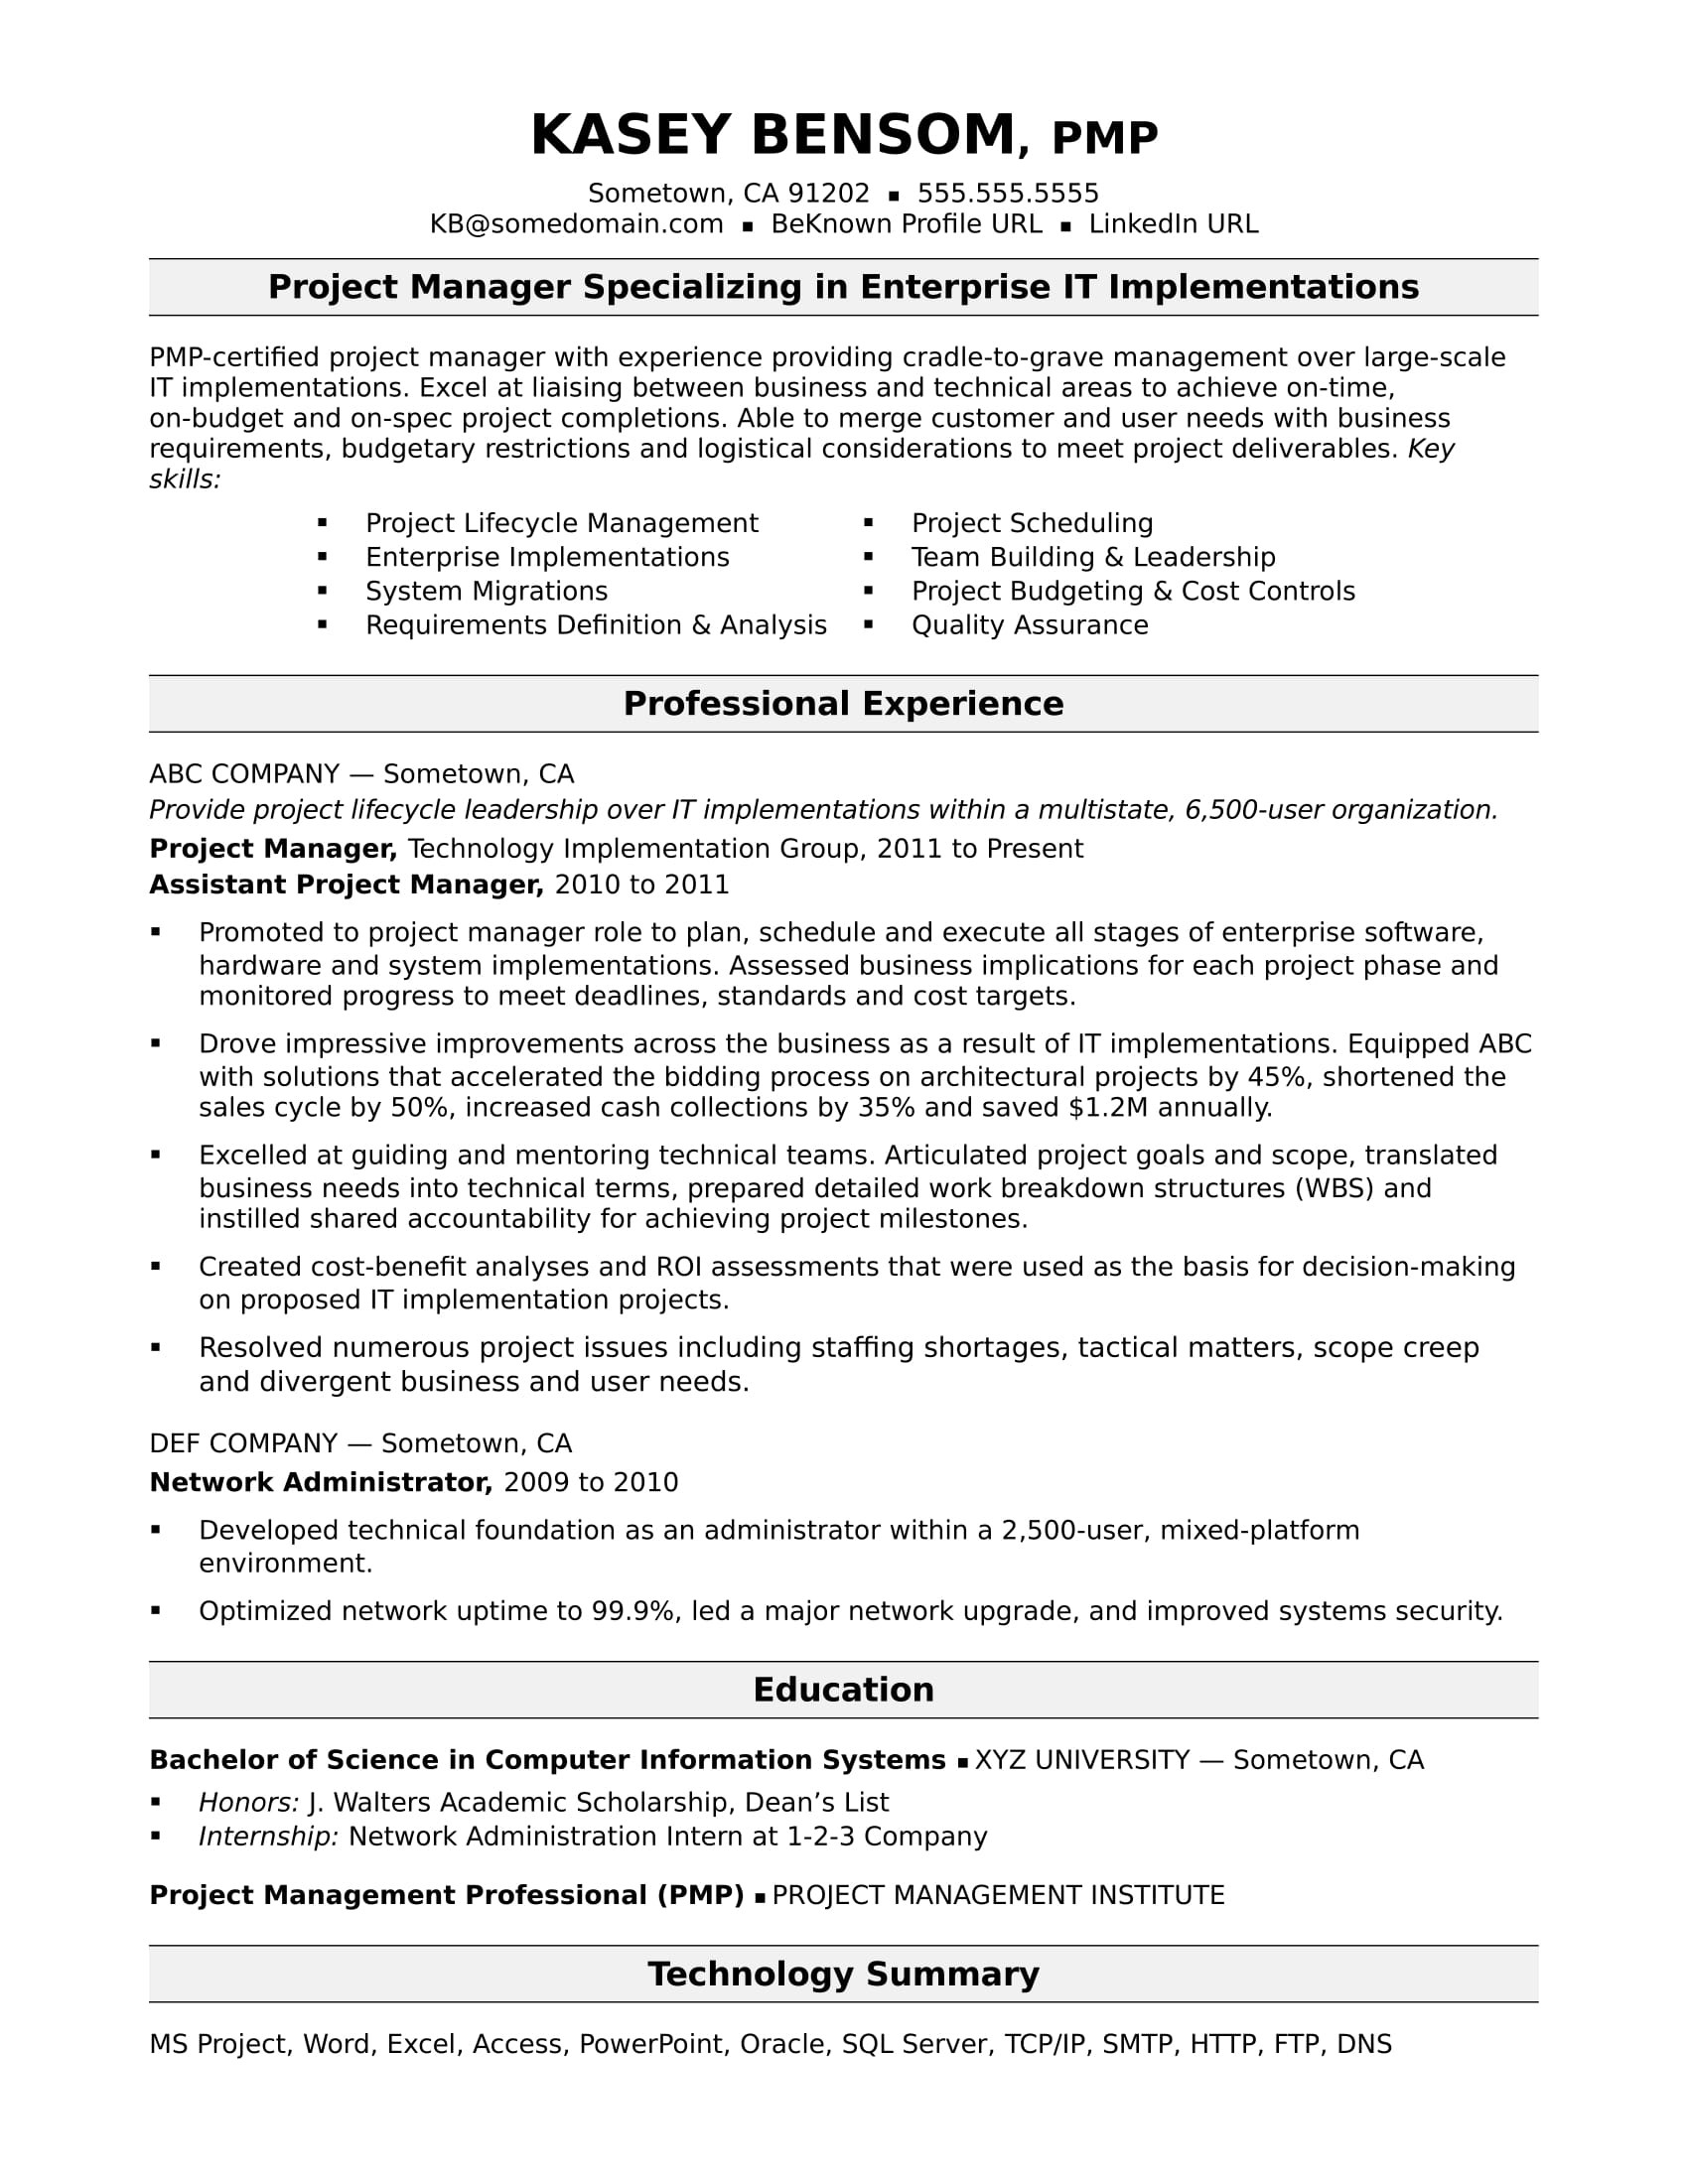 Sample Group Project Info In Resume Midlevel It Project Manager Resume Monster.com